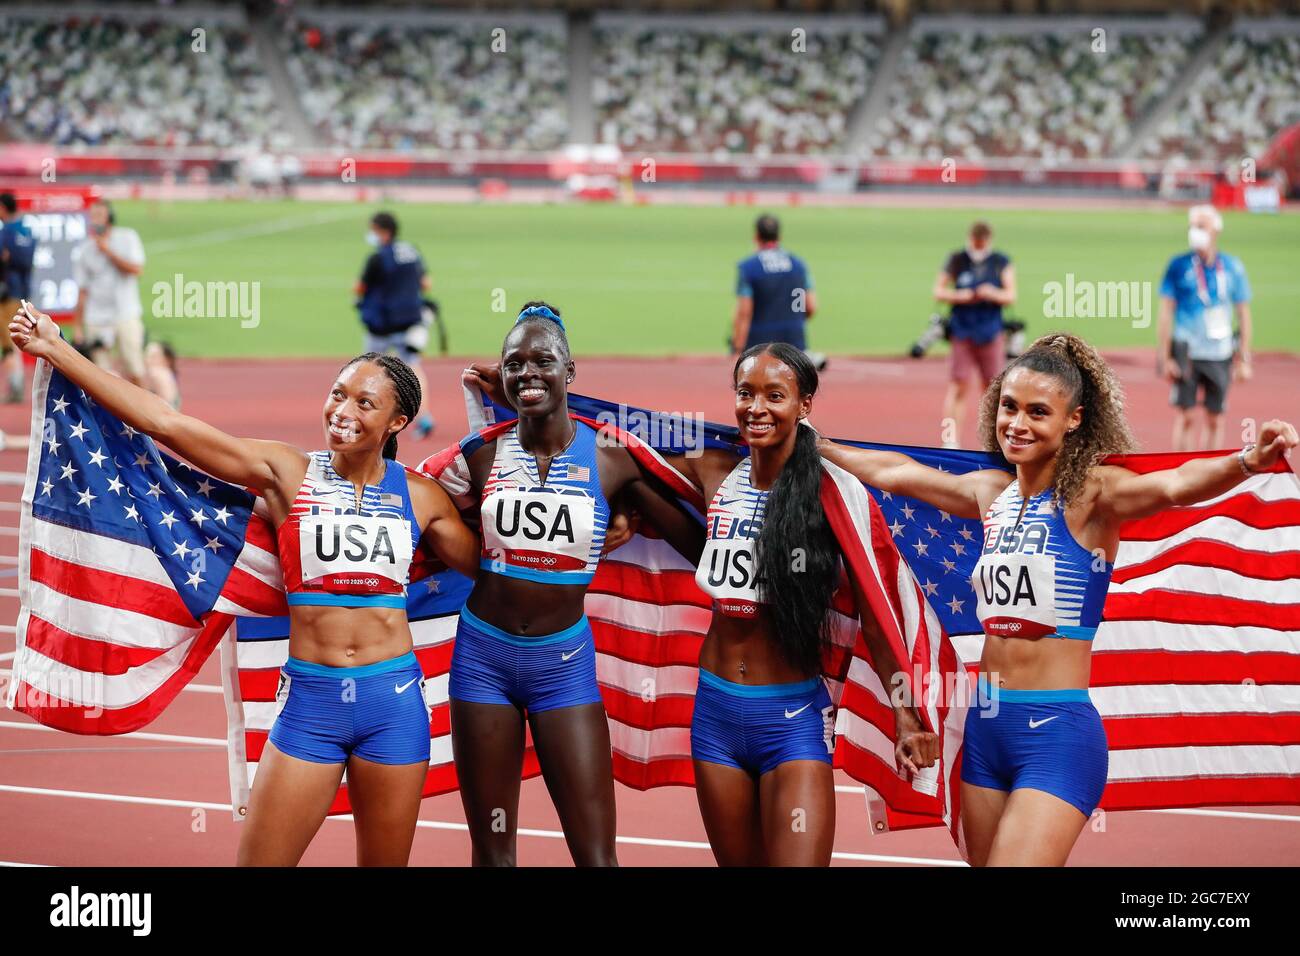 Tokyo, Japan. 07th Aug, 2021. Team USA celebrates their gold medal win in the Women's 4x400m final at Olympic Stadium during the 2020 Summer Olympics in Tokyo, Japan on Saturday, August 7, 2021. The United States took gold with a time of 3:16.85 while Poland took silver with a time of 3:20.53 and Jamaica took bronze with a time of 3:21.24. Photo by Tasos Katopodis/UPI Credit: UPI/Alamy Live News Stock Photo